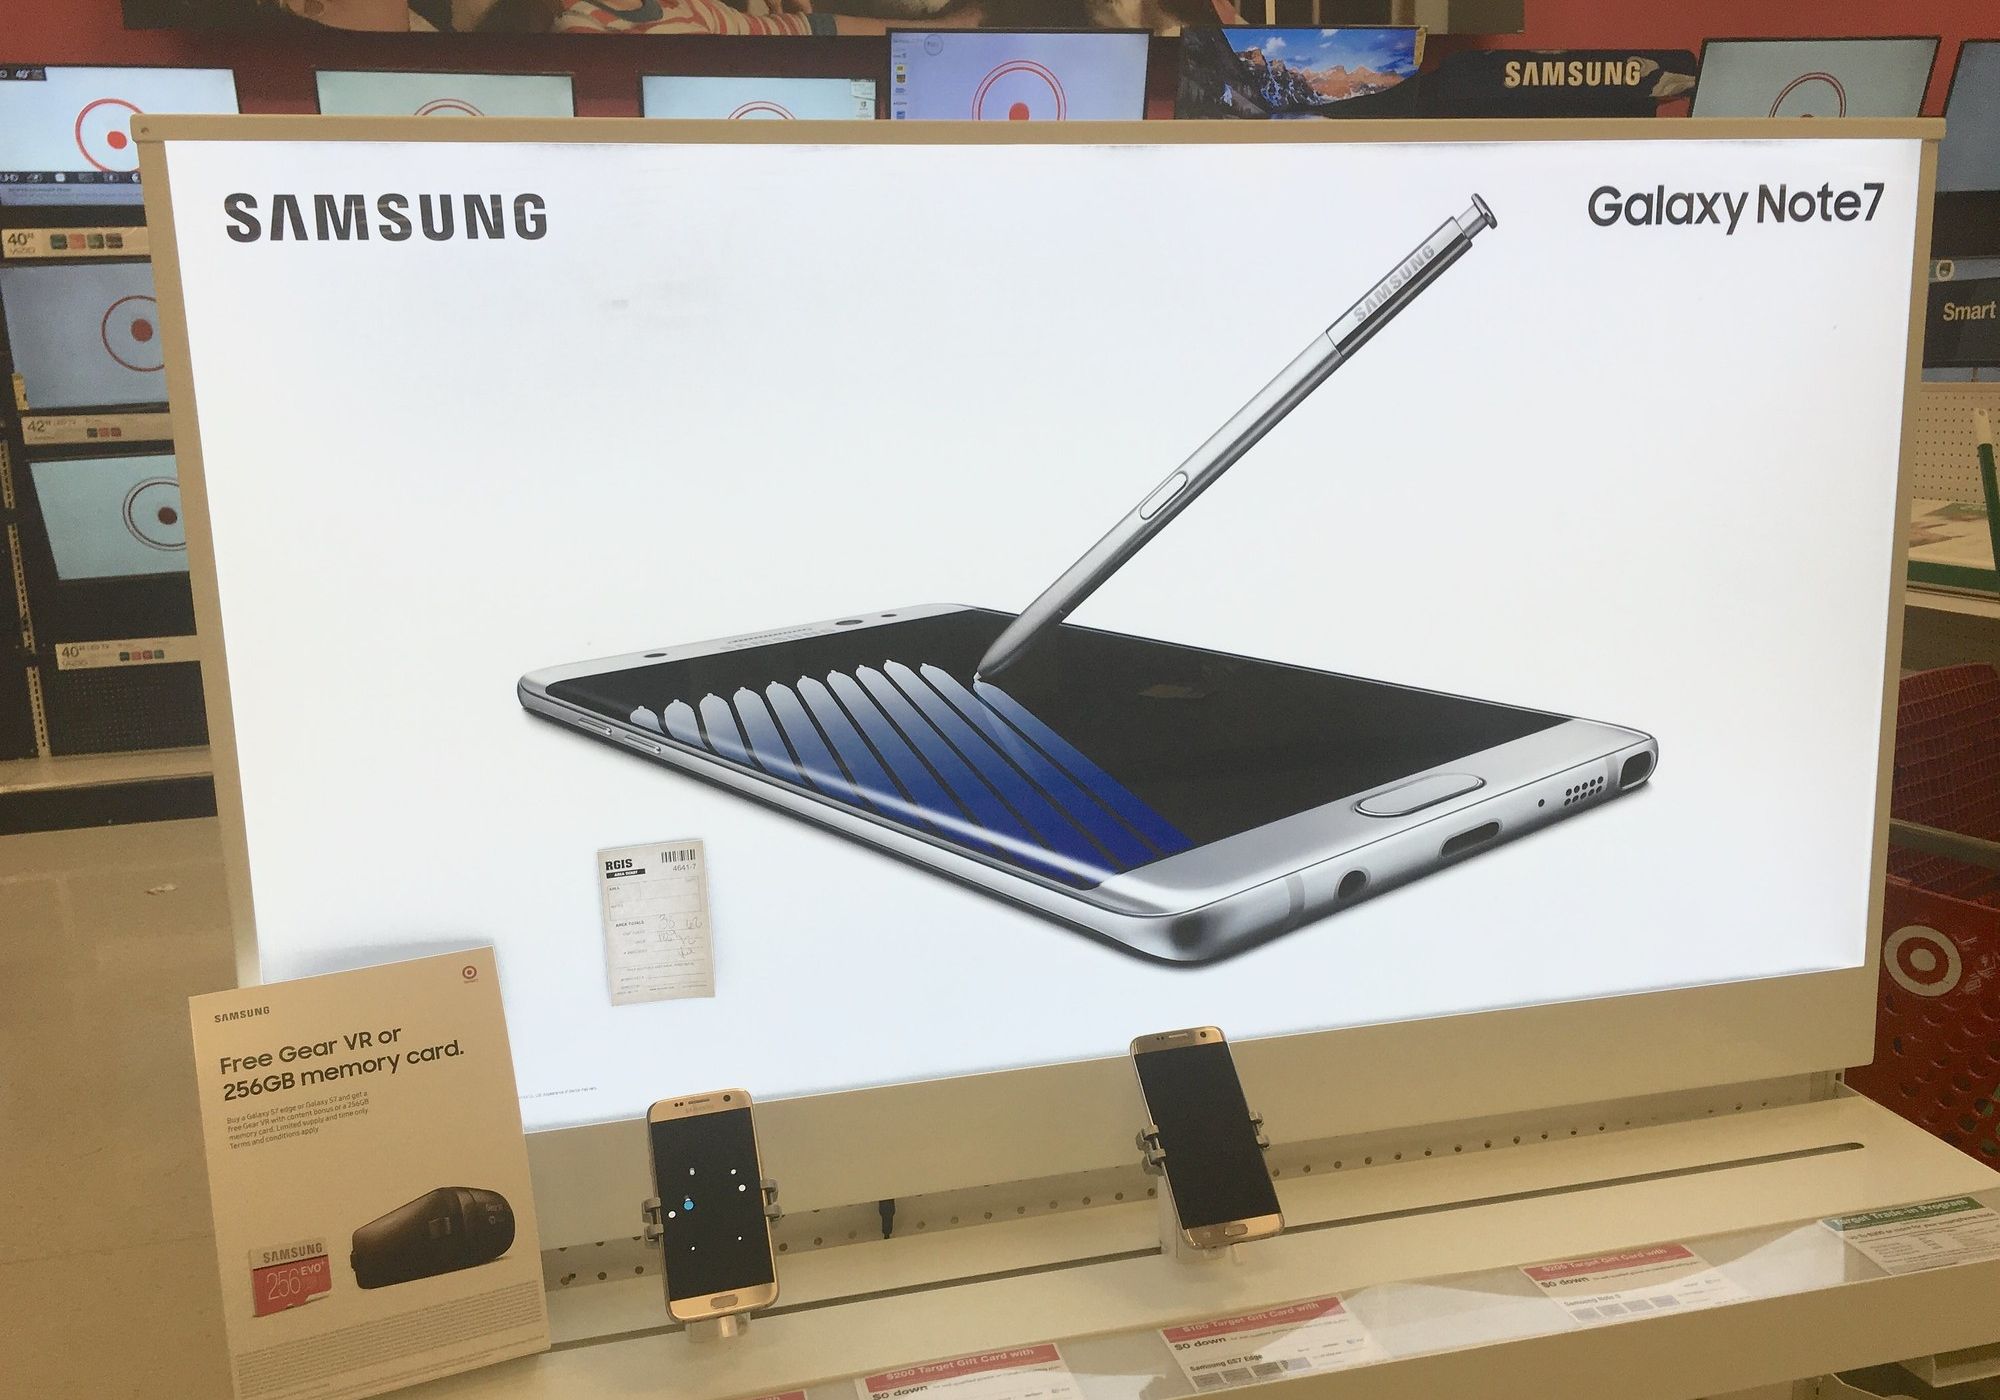 Display board showing Galaxy Note 7 at an electronic store